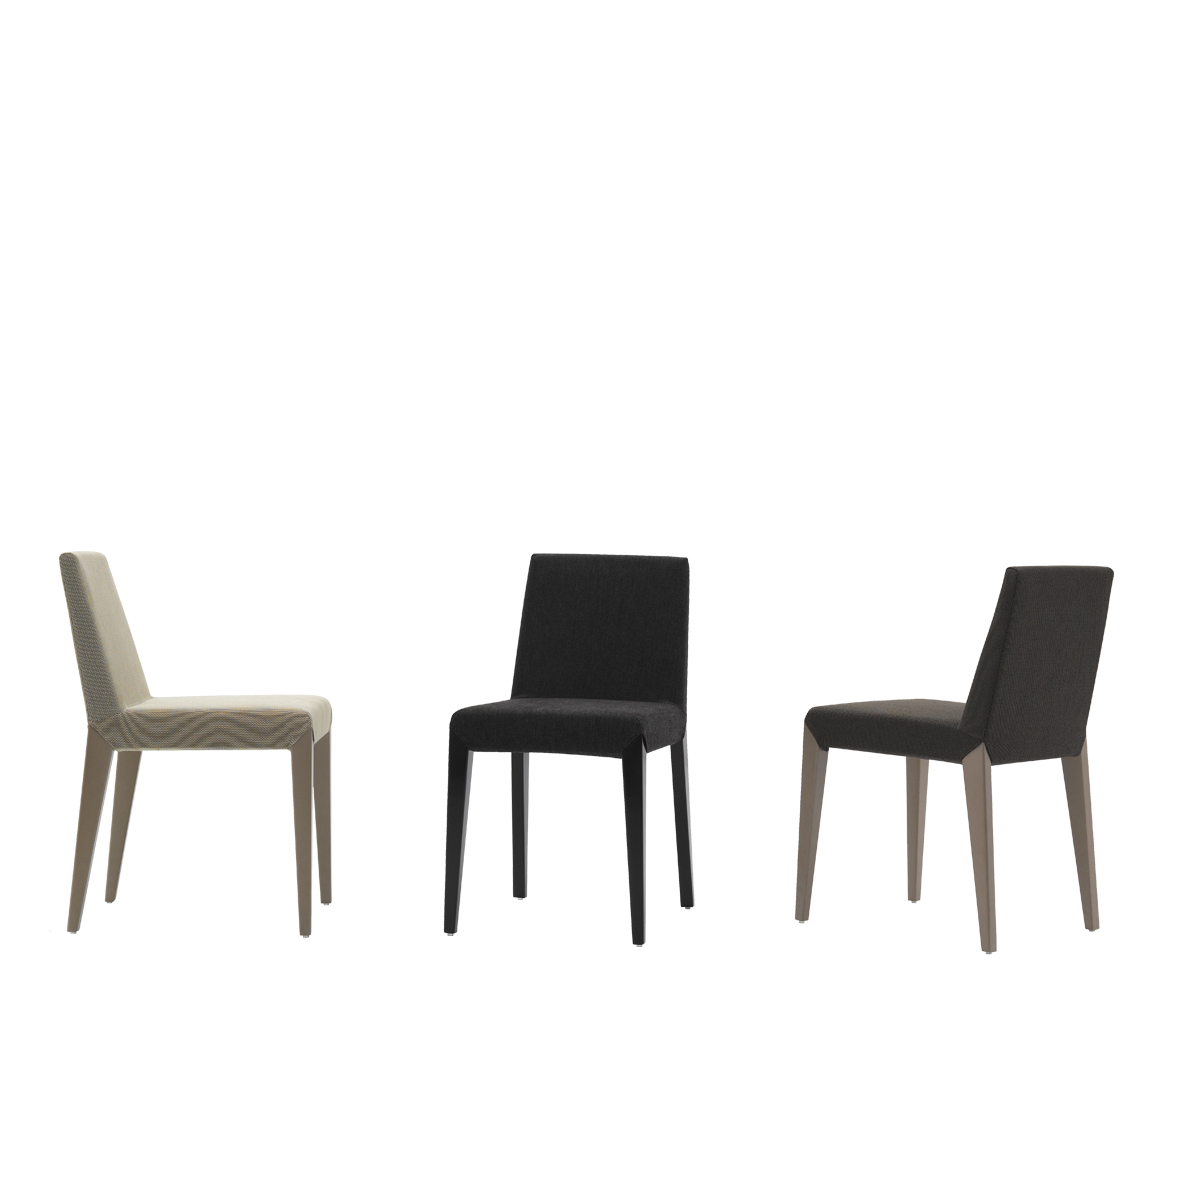 ALI UPHOLSTERED DINING CHAIR - Beyond Furniture